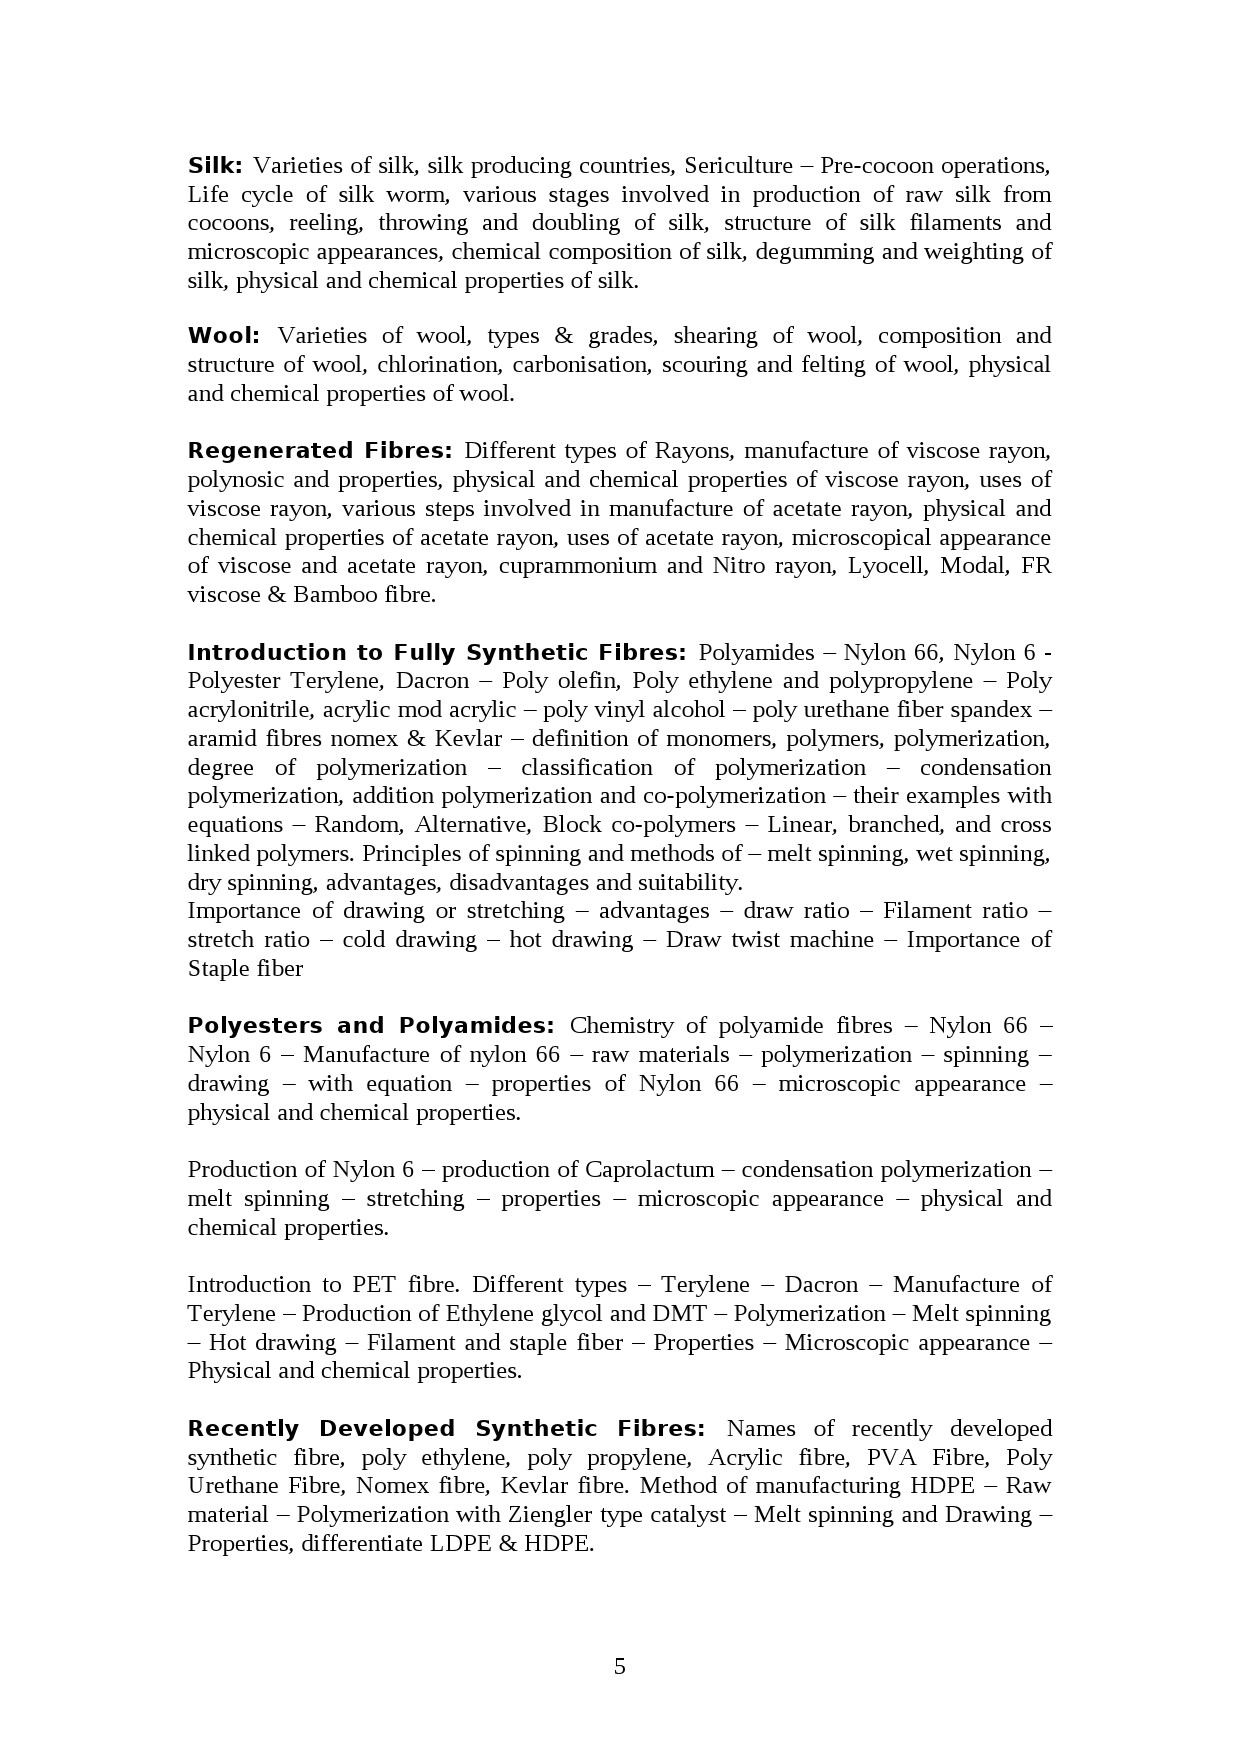 Textile Technology Lecturer in Polytechnic Exam Syllabus - Notification Image 5